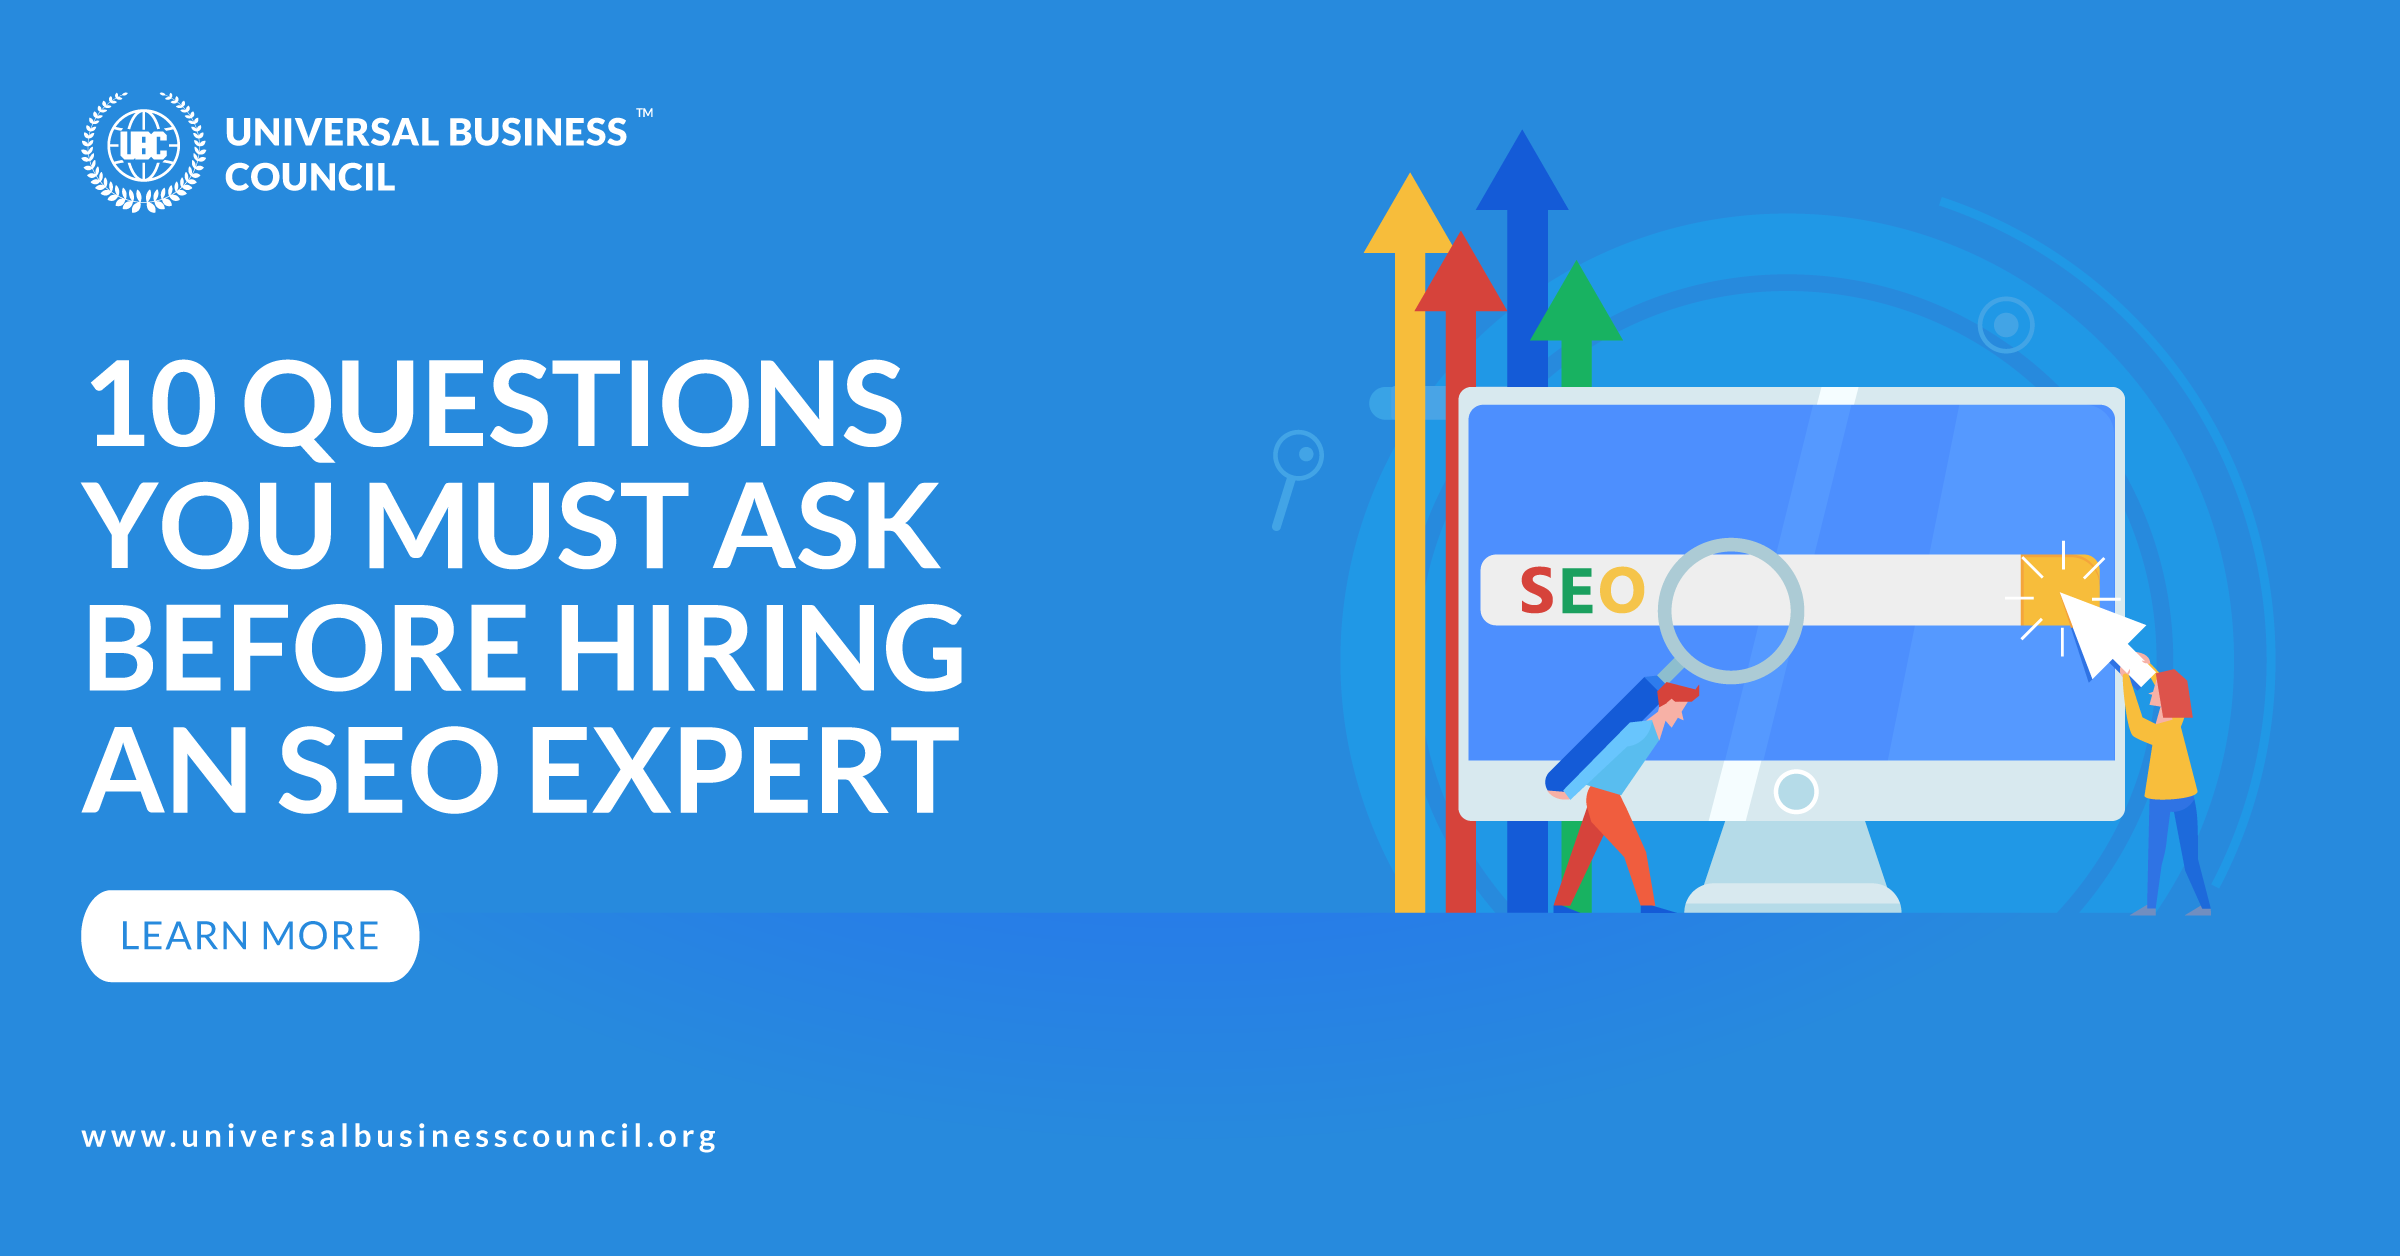 10-Questions-You-Must-Ask-Before-Hiring-an-SEO-expert